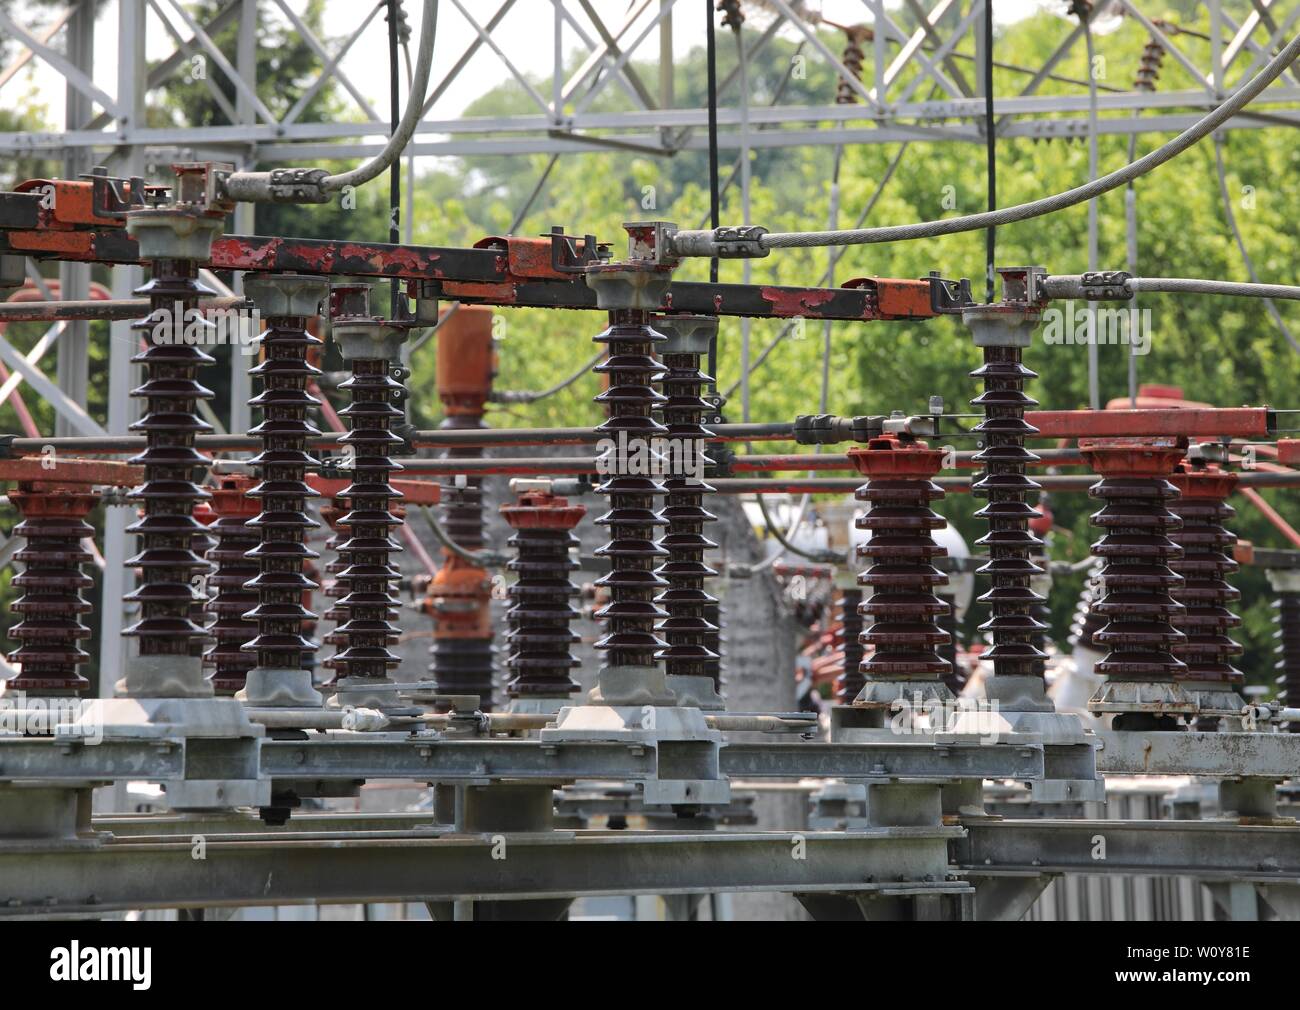 industrial breakers and high voltage switches in the power plant Stock Photo